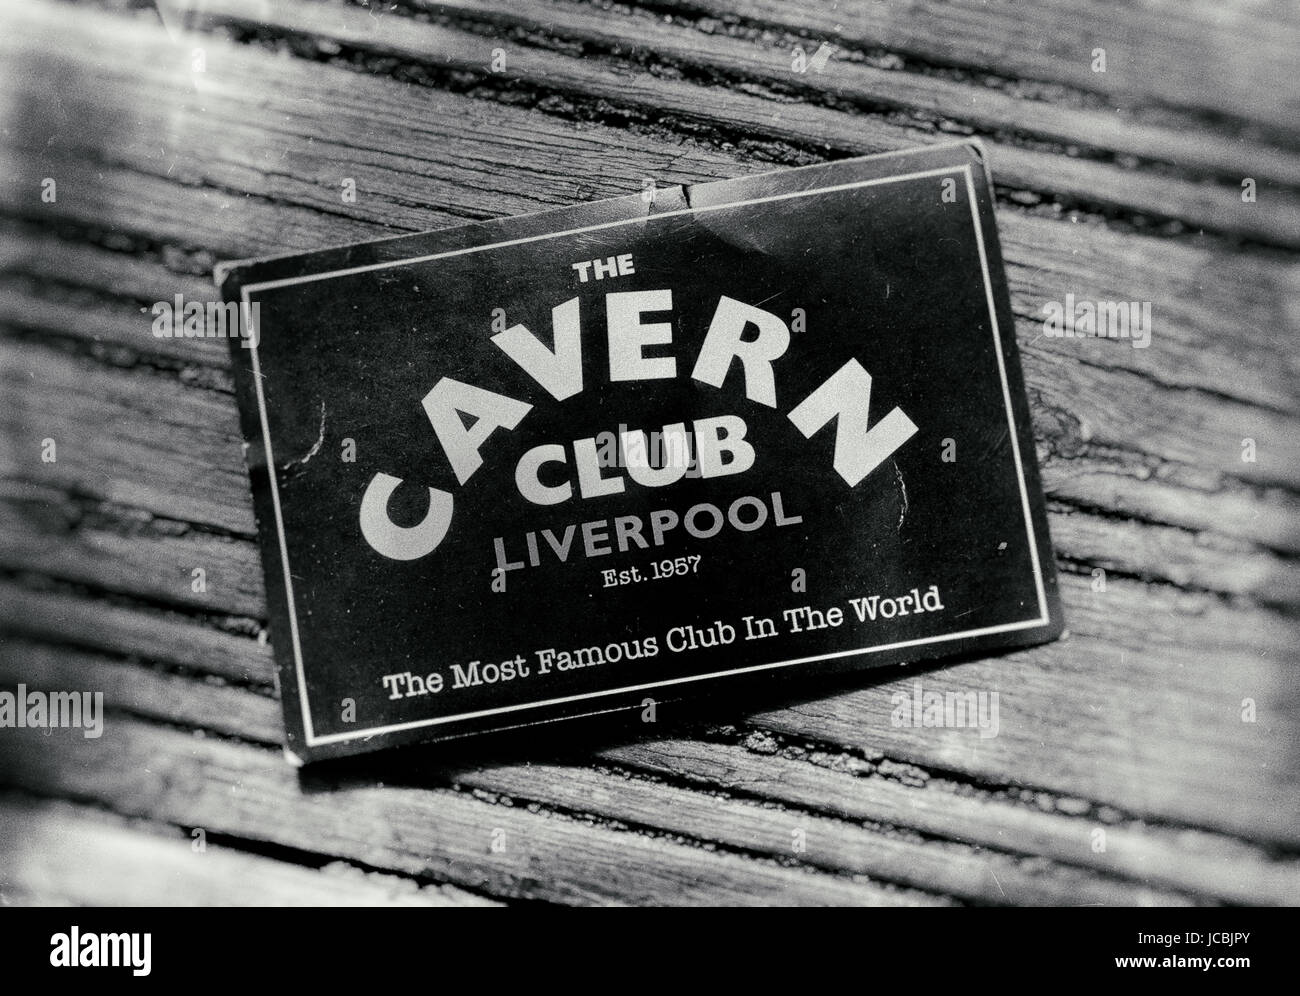 A Flyer for The Cavern Club on Matthew Street, Liverpool, England, Made famous by The Beatles in the 1960's Stock Photo